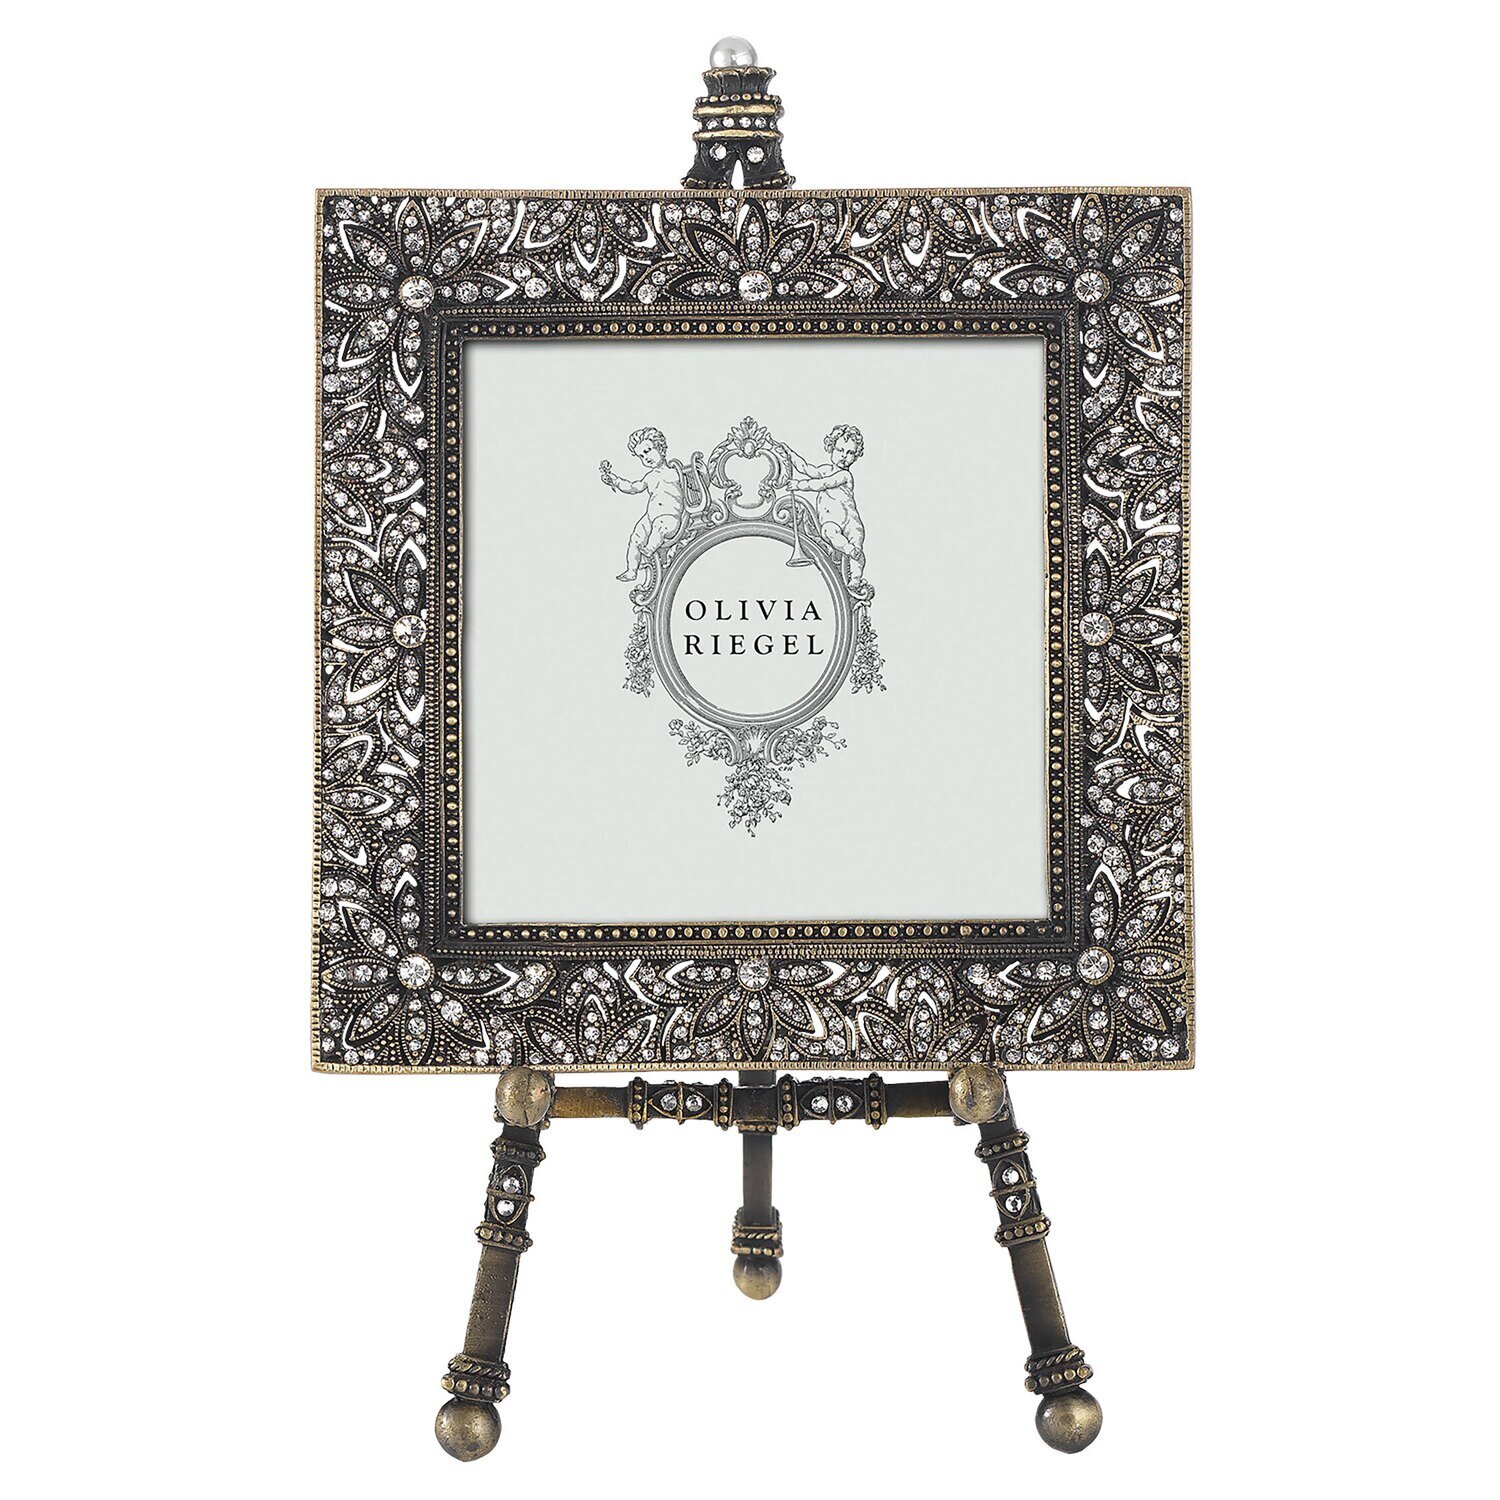 Olivia Riegel Bronze Windsor 4 x 4 Inch Picture Frame on Easel RT4740